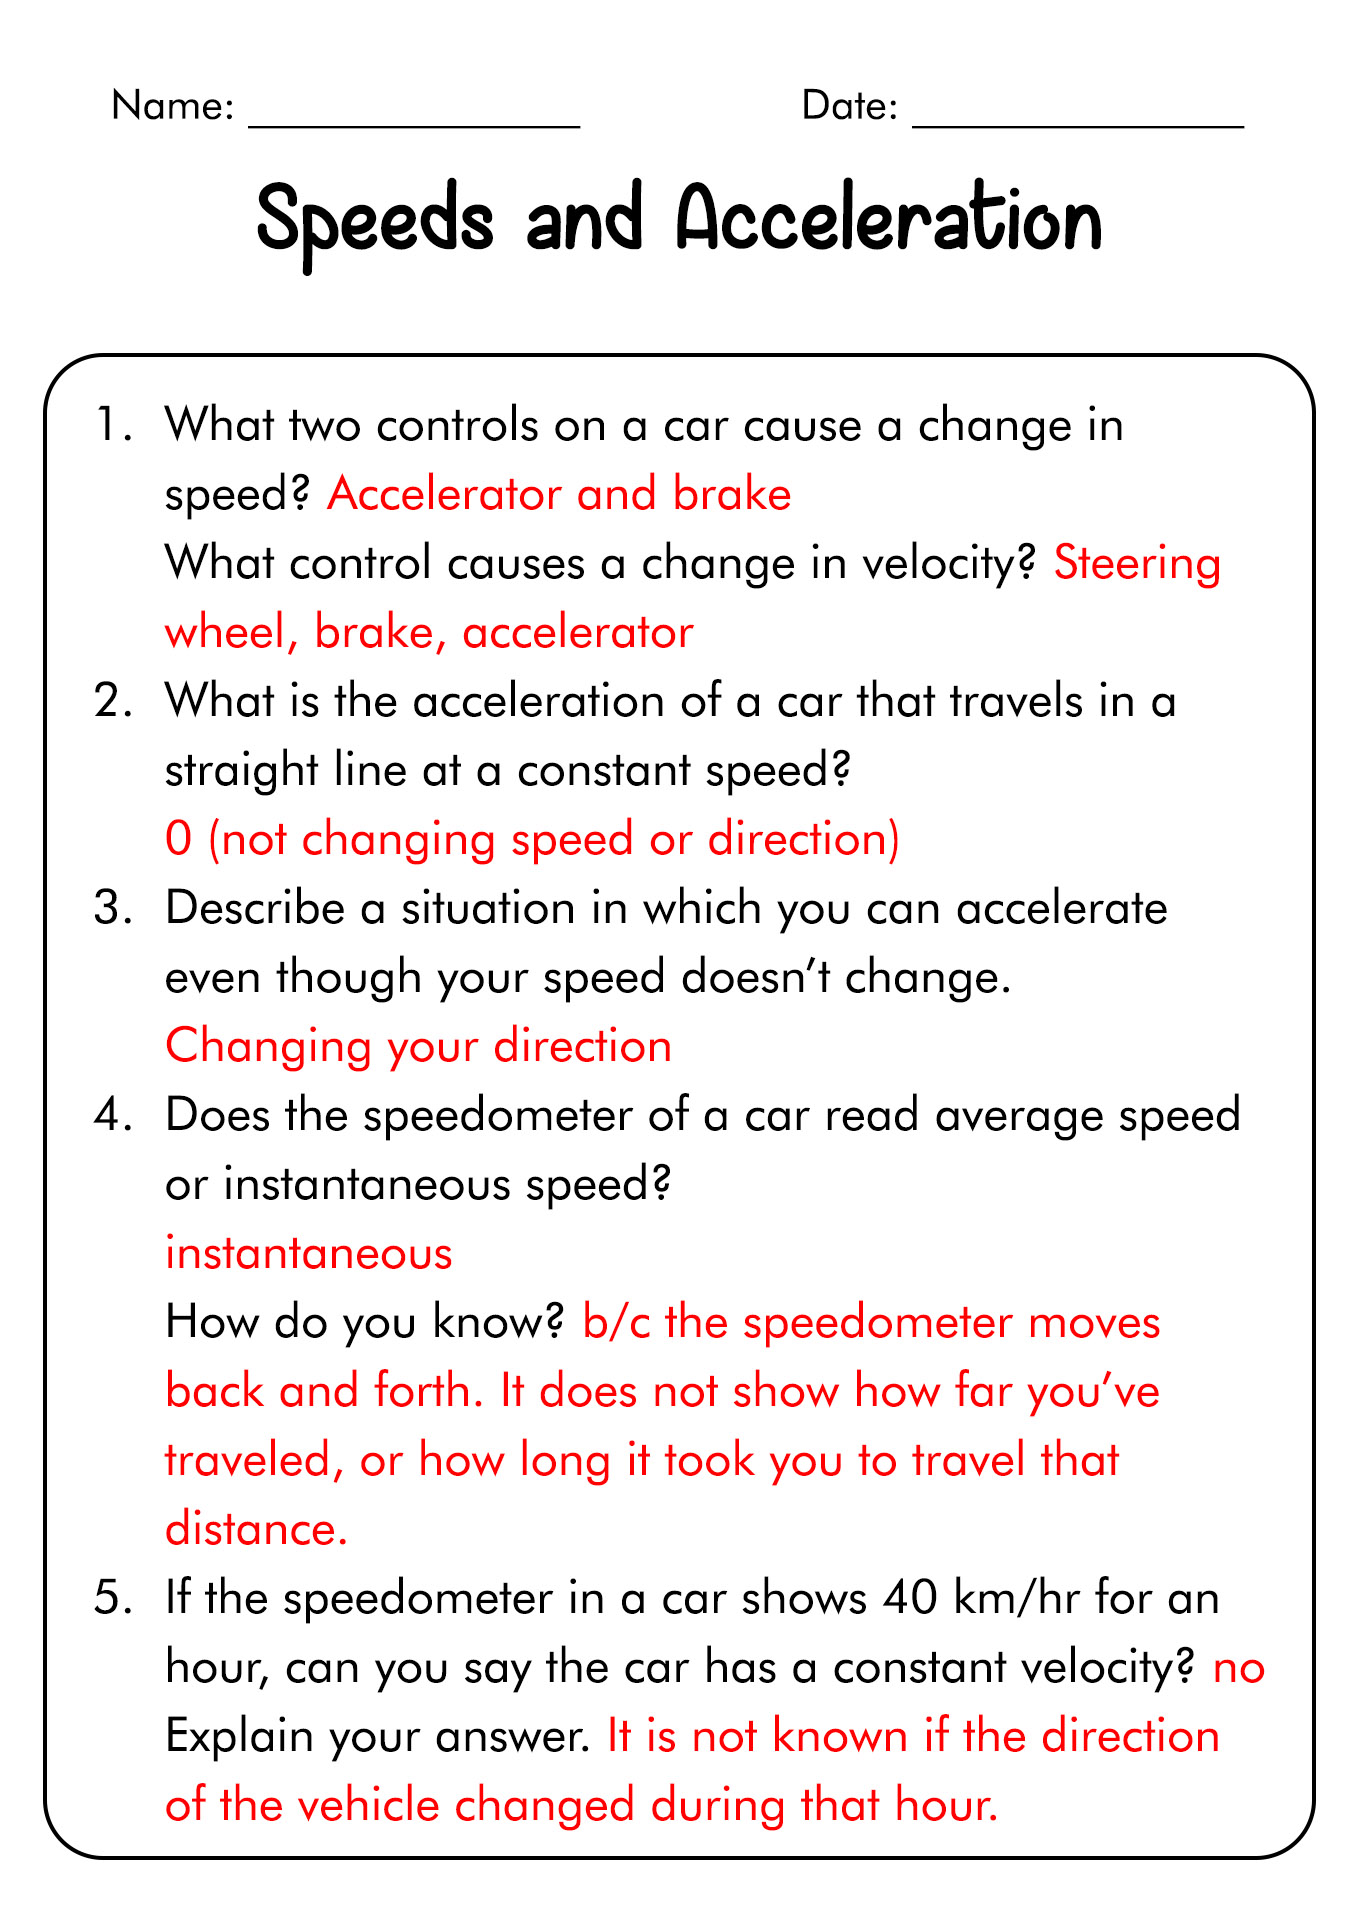 Speed and Acceleration Worksheet Answers